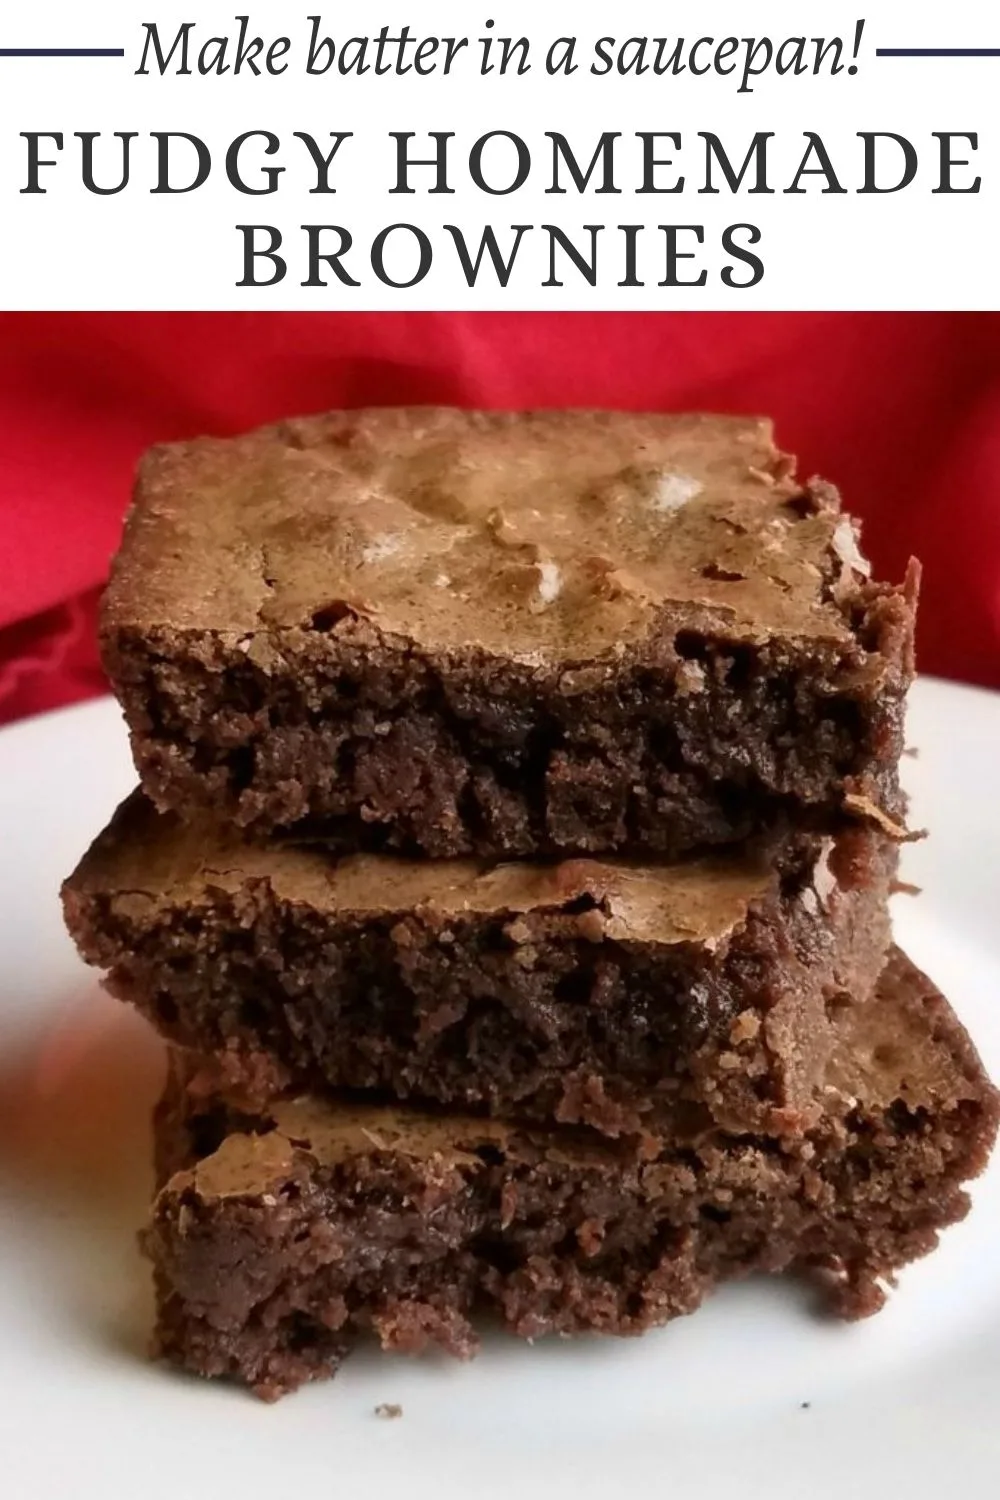 These deliciously fudgy brownies don't require baking powder and are so simple to make. You whip up the batter in a saucepan and it's ready to bake in no time!